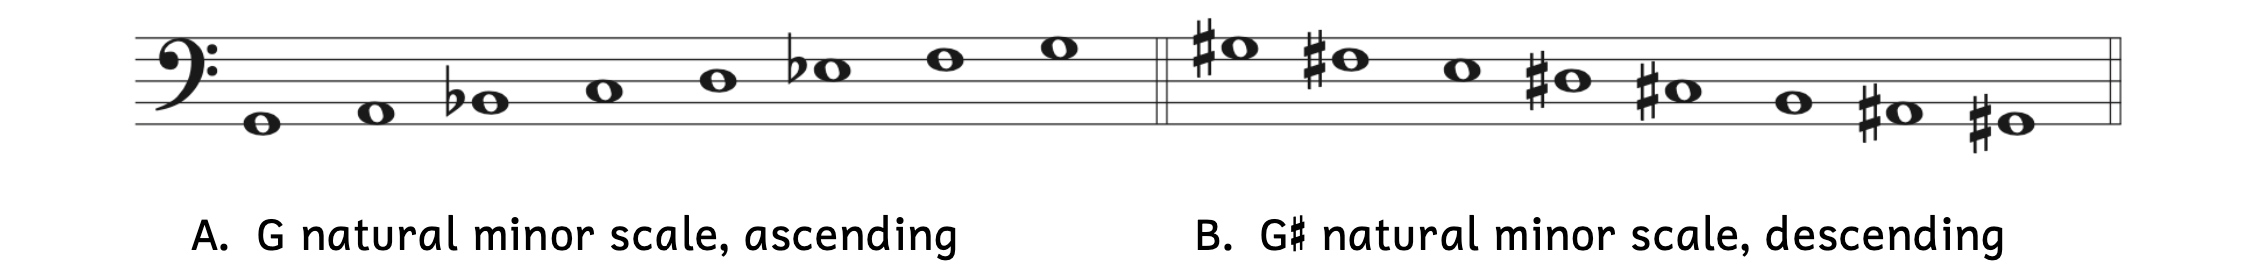 Step three: Add the accidentals based on the whole steps and half steps. In Example A, flats are added to B and E. In Example B, sharps are added to F, D, C, and A.